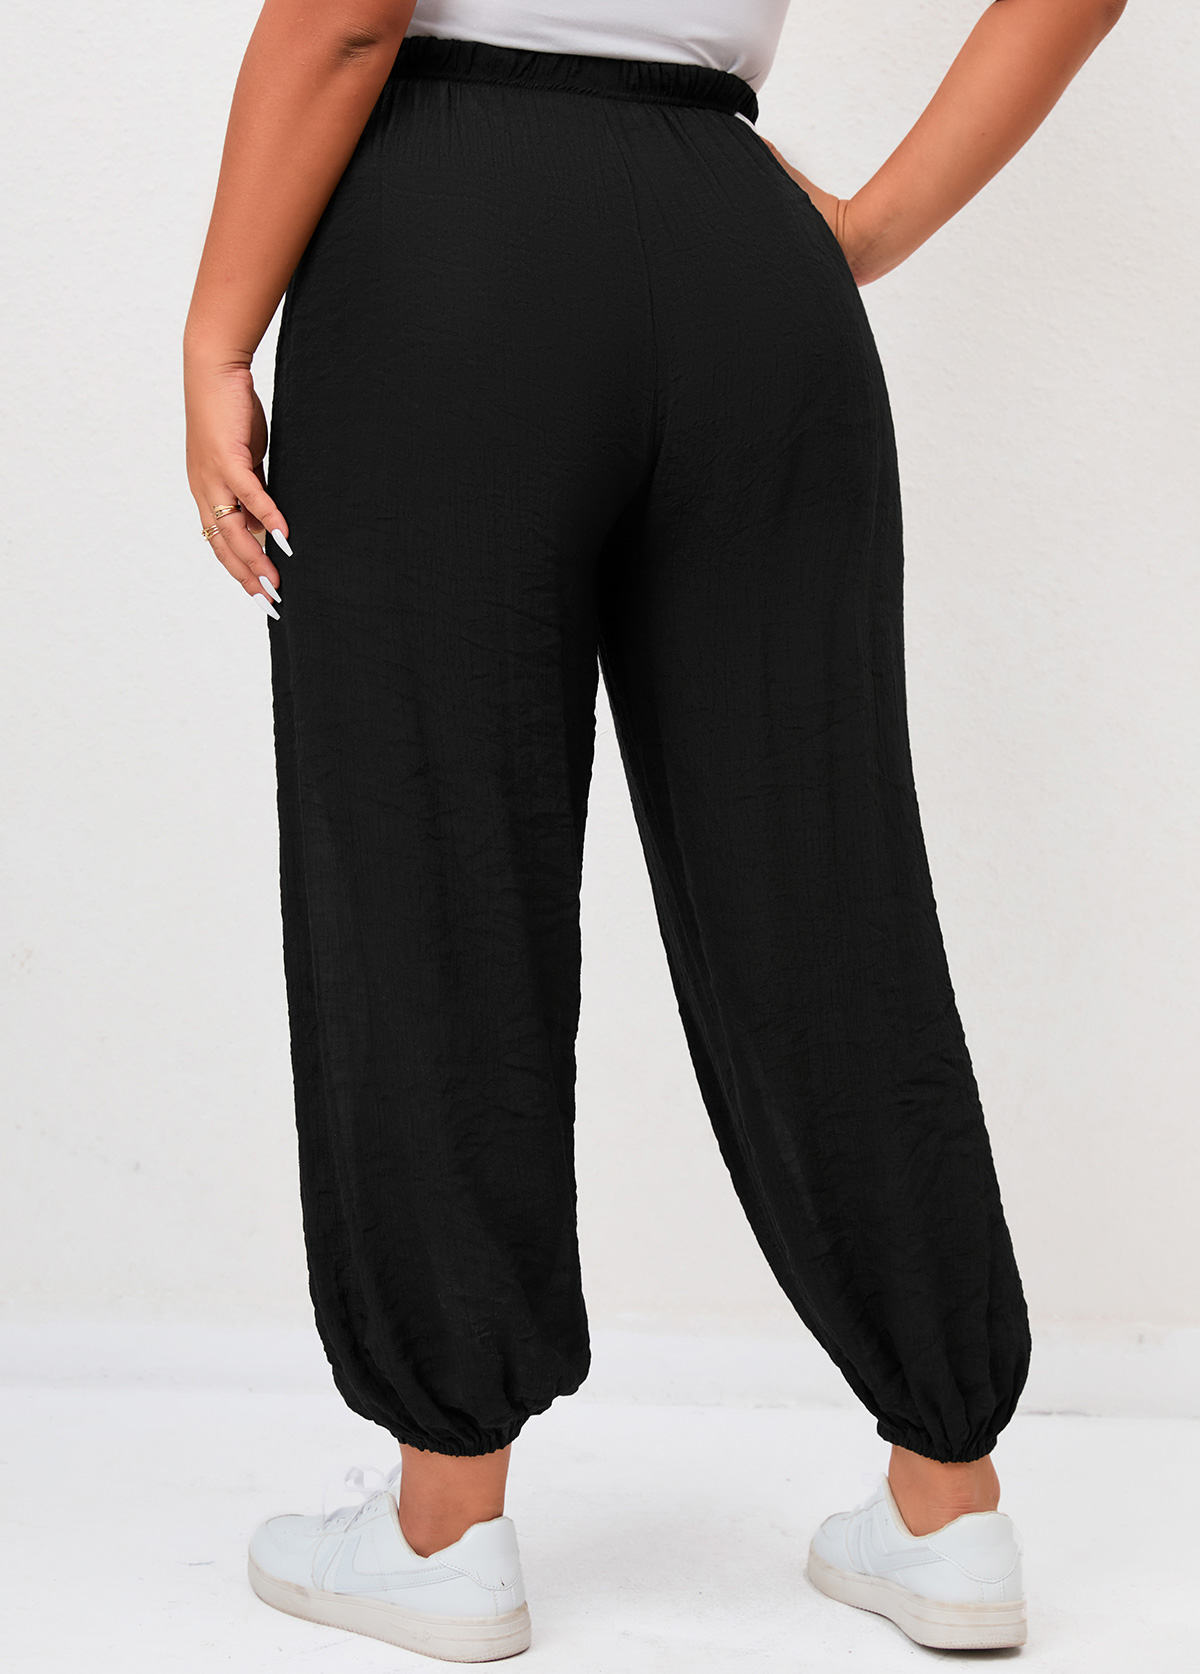 Black Tie Front Plus Size High Waisted Pants